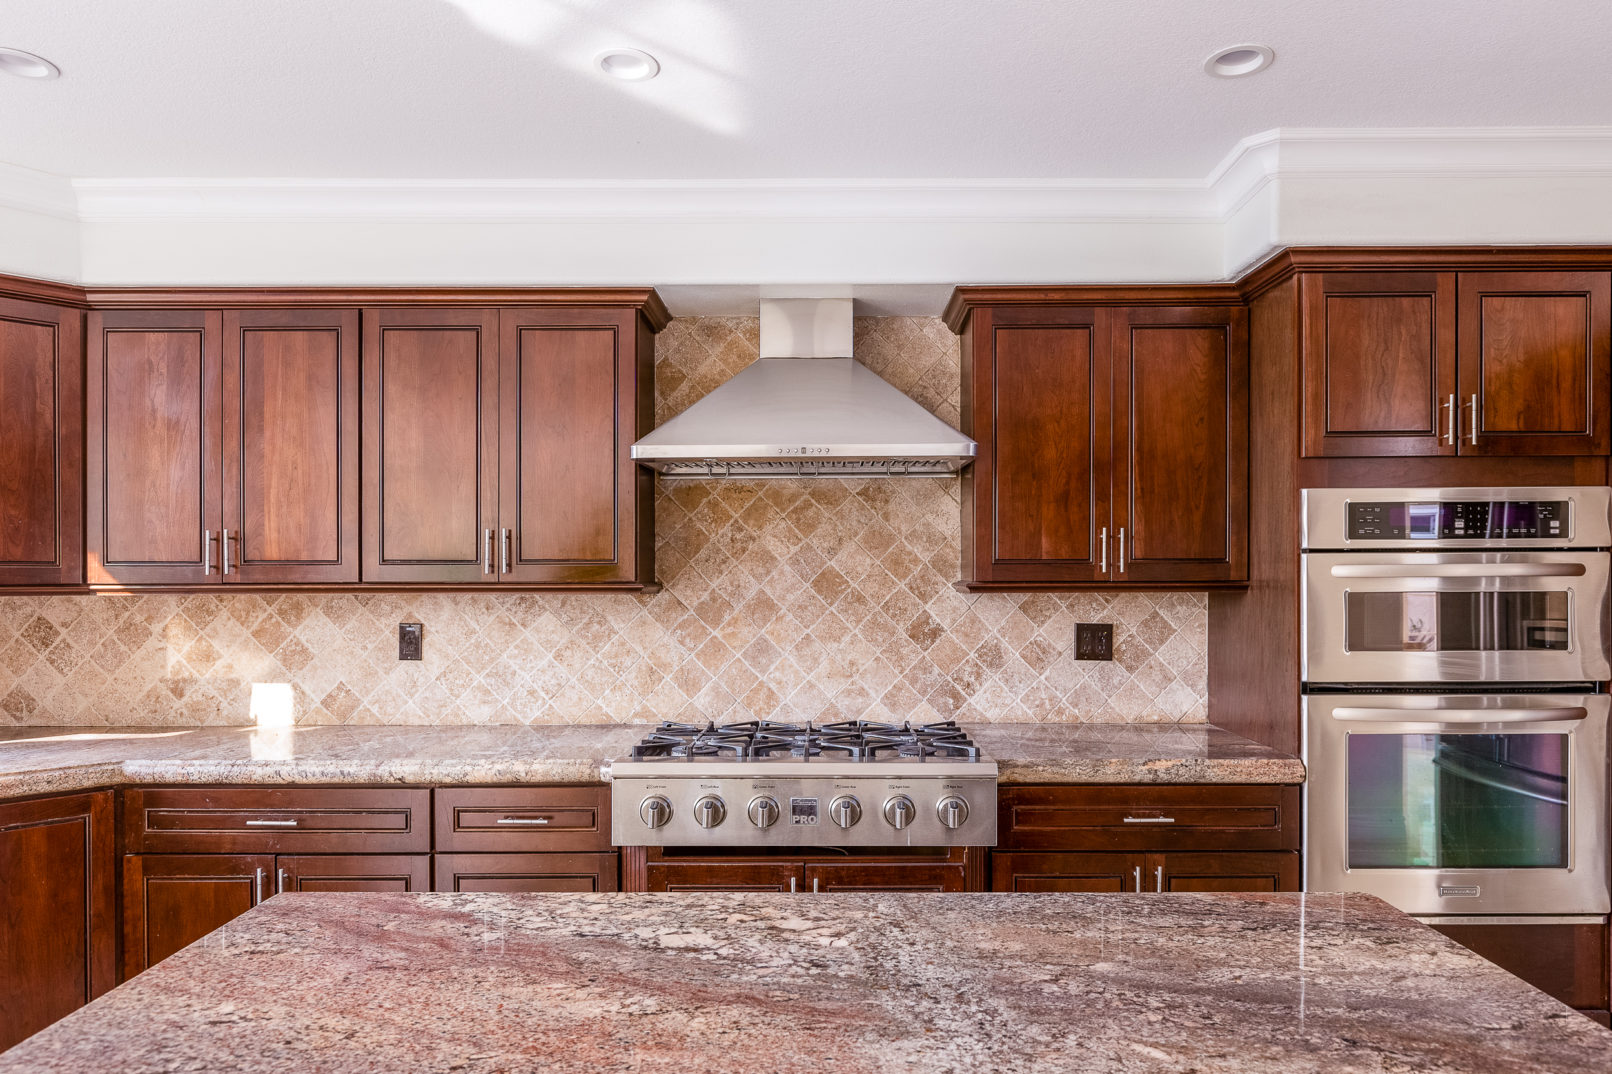 Orange County Real Estate Photographer Photographed an image of a Kitchen in Laguna Niguel California